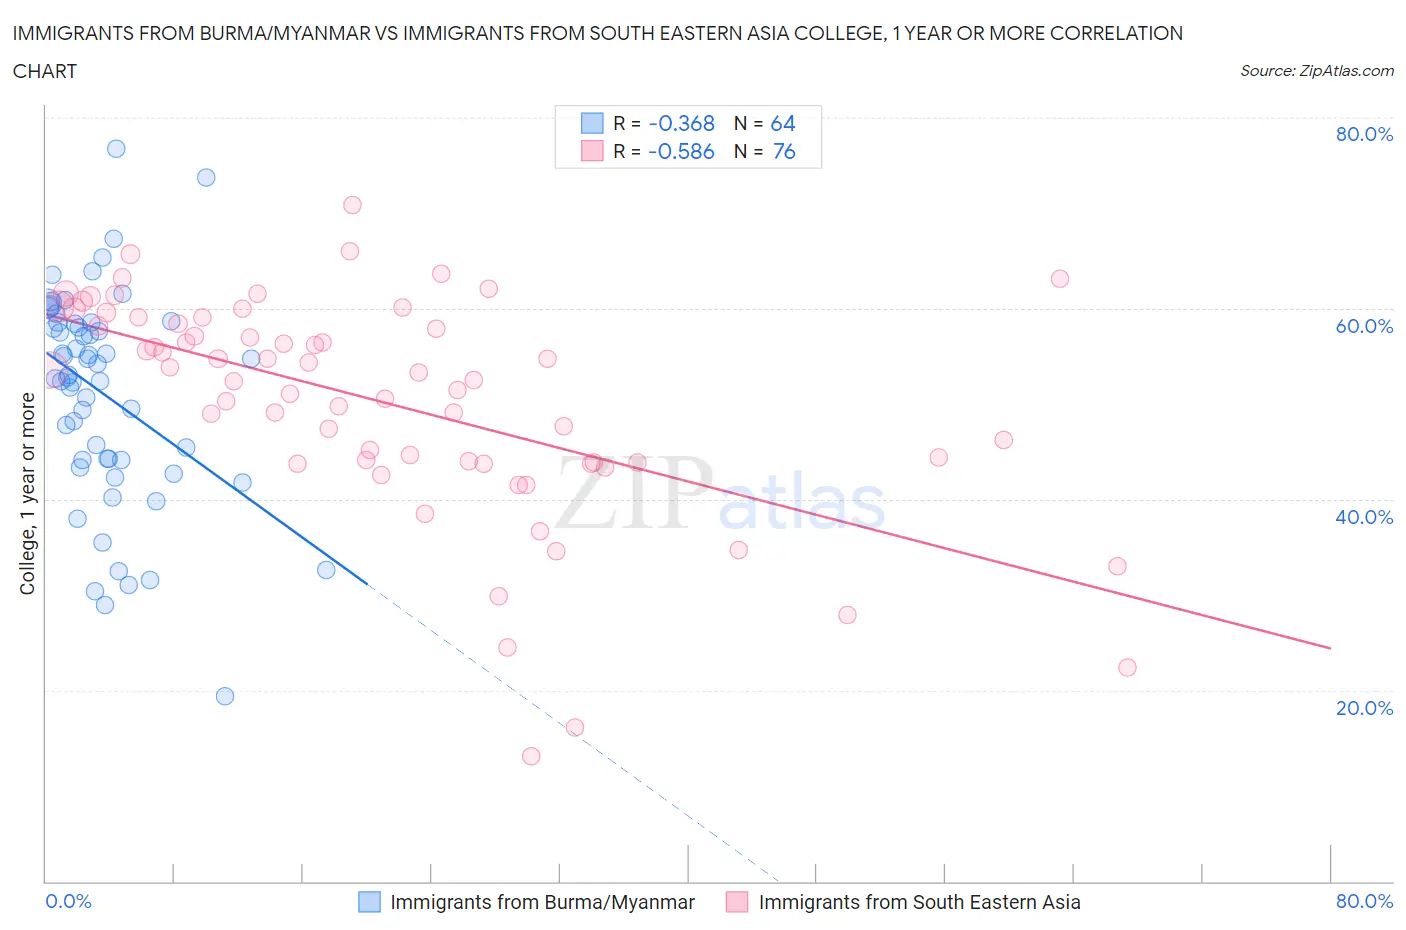 Immigrants from Burma/Myanmar vs Immigrants from South Eastern Asia College, 1 year or more